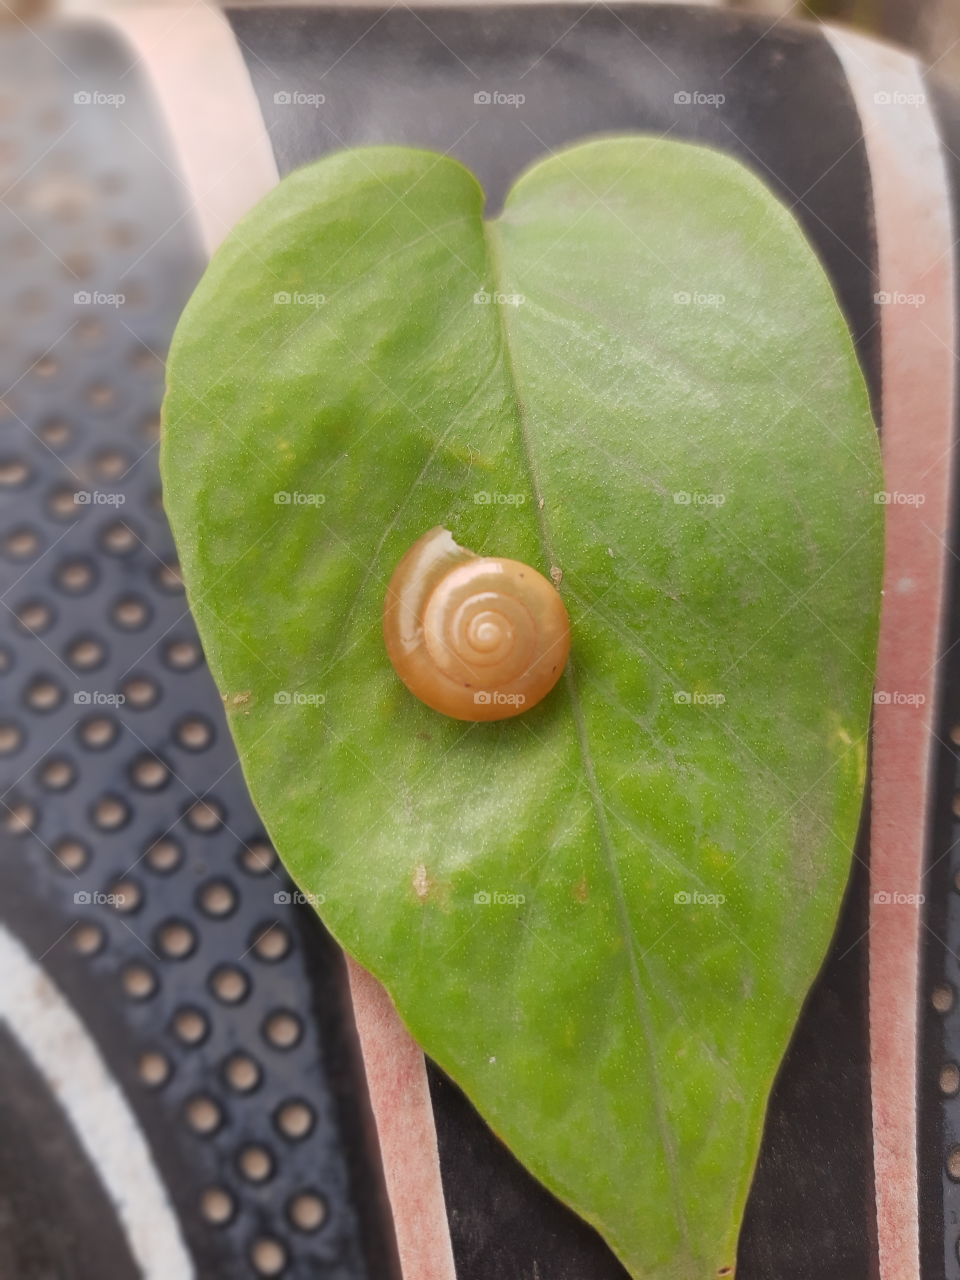 snail shell on the leaf